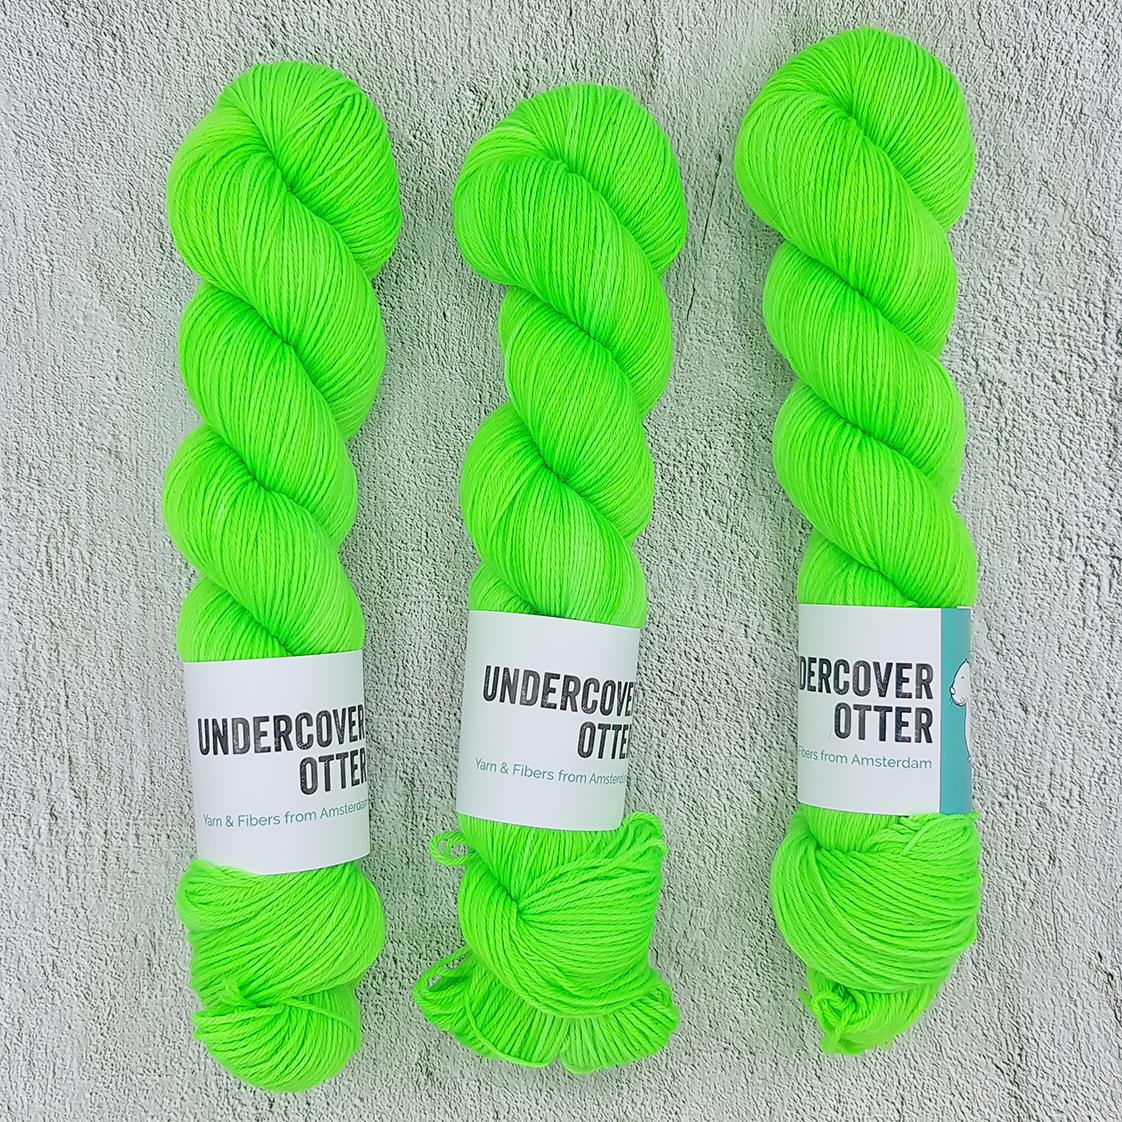 Toxie - Squirm Sock - Undercover Otter